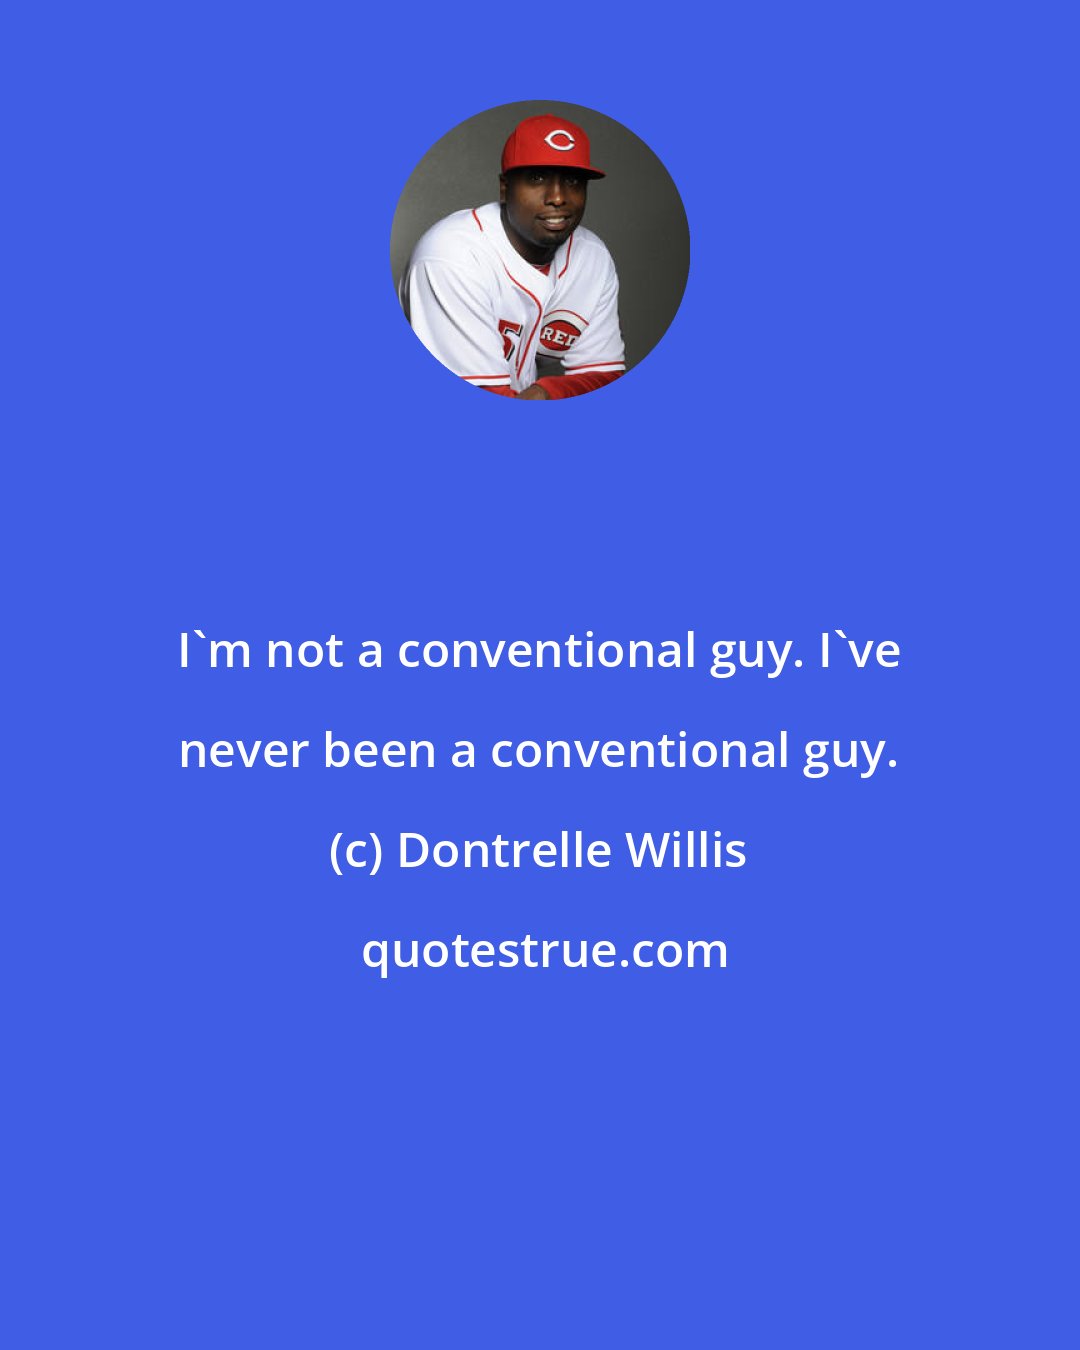 Dontrelle Willis: I'm not a conventional guy. I've never been a conventional guy.